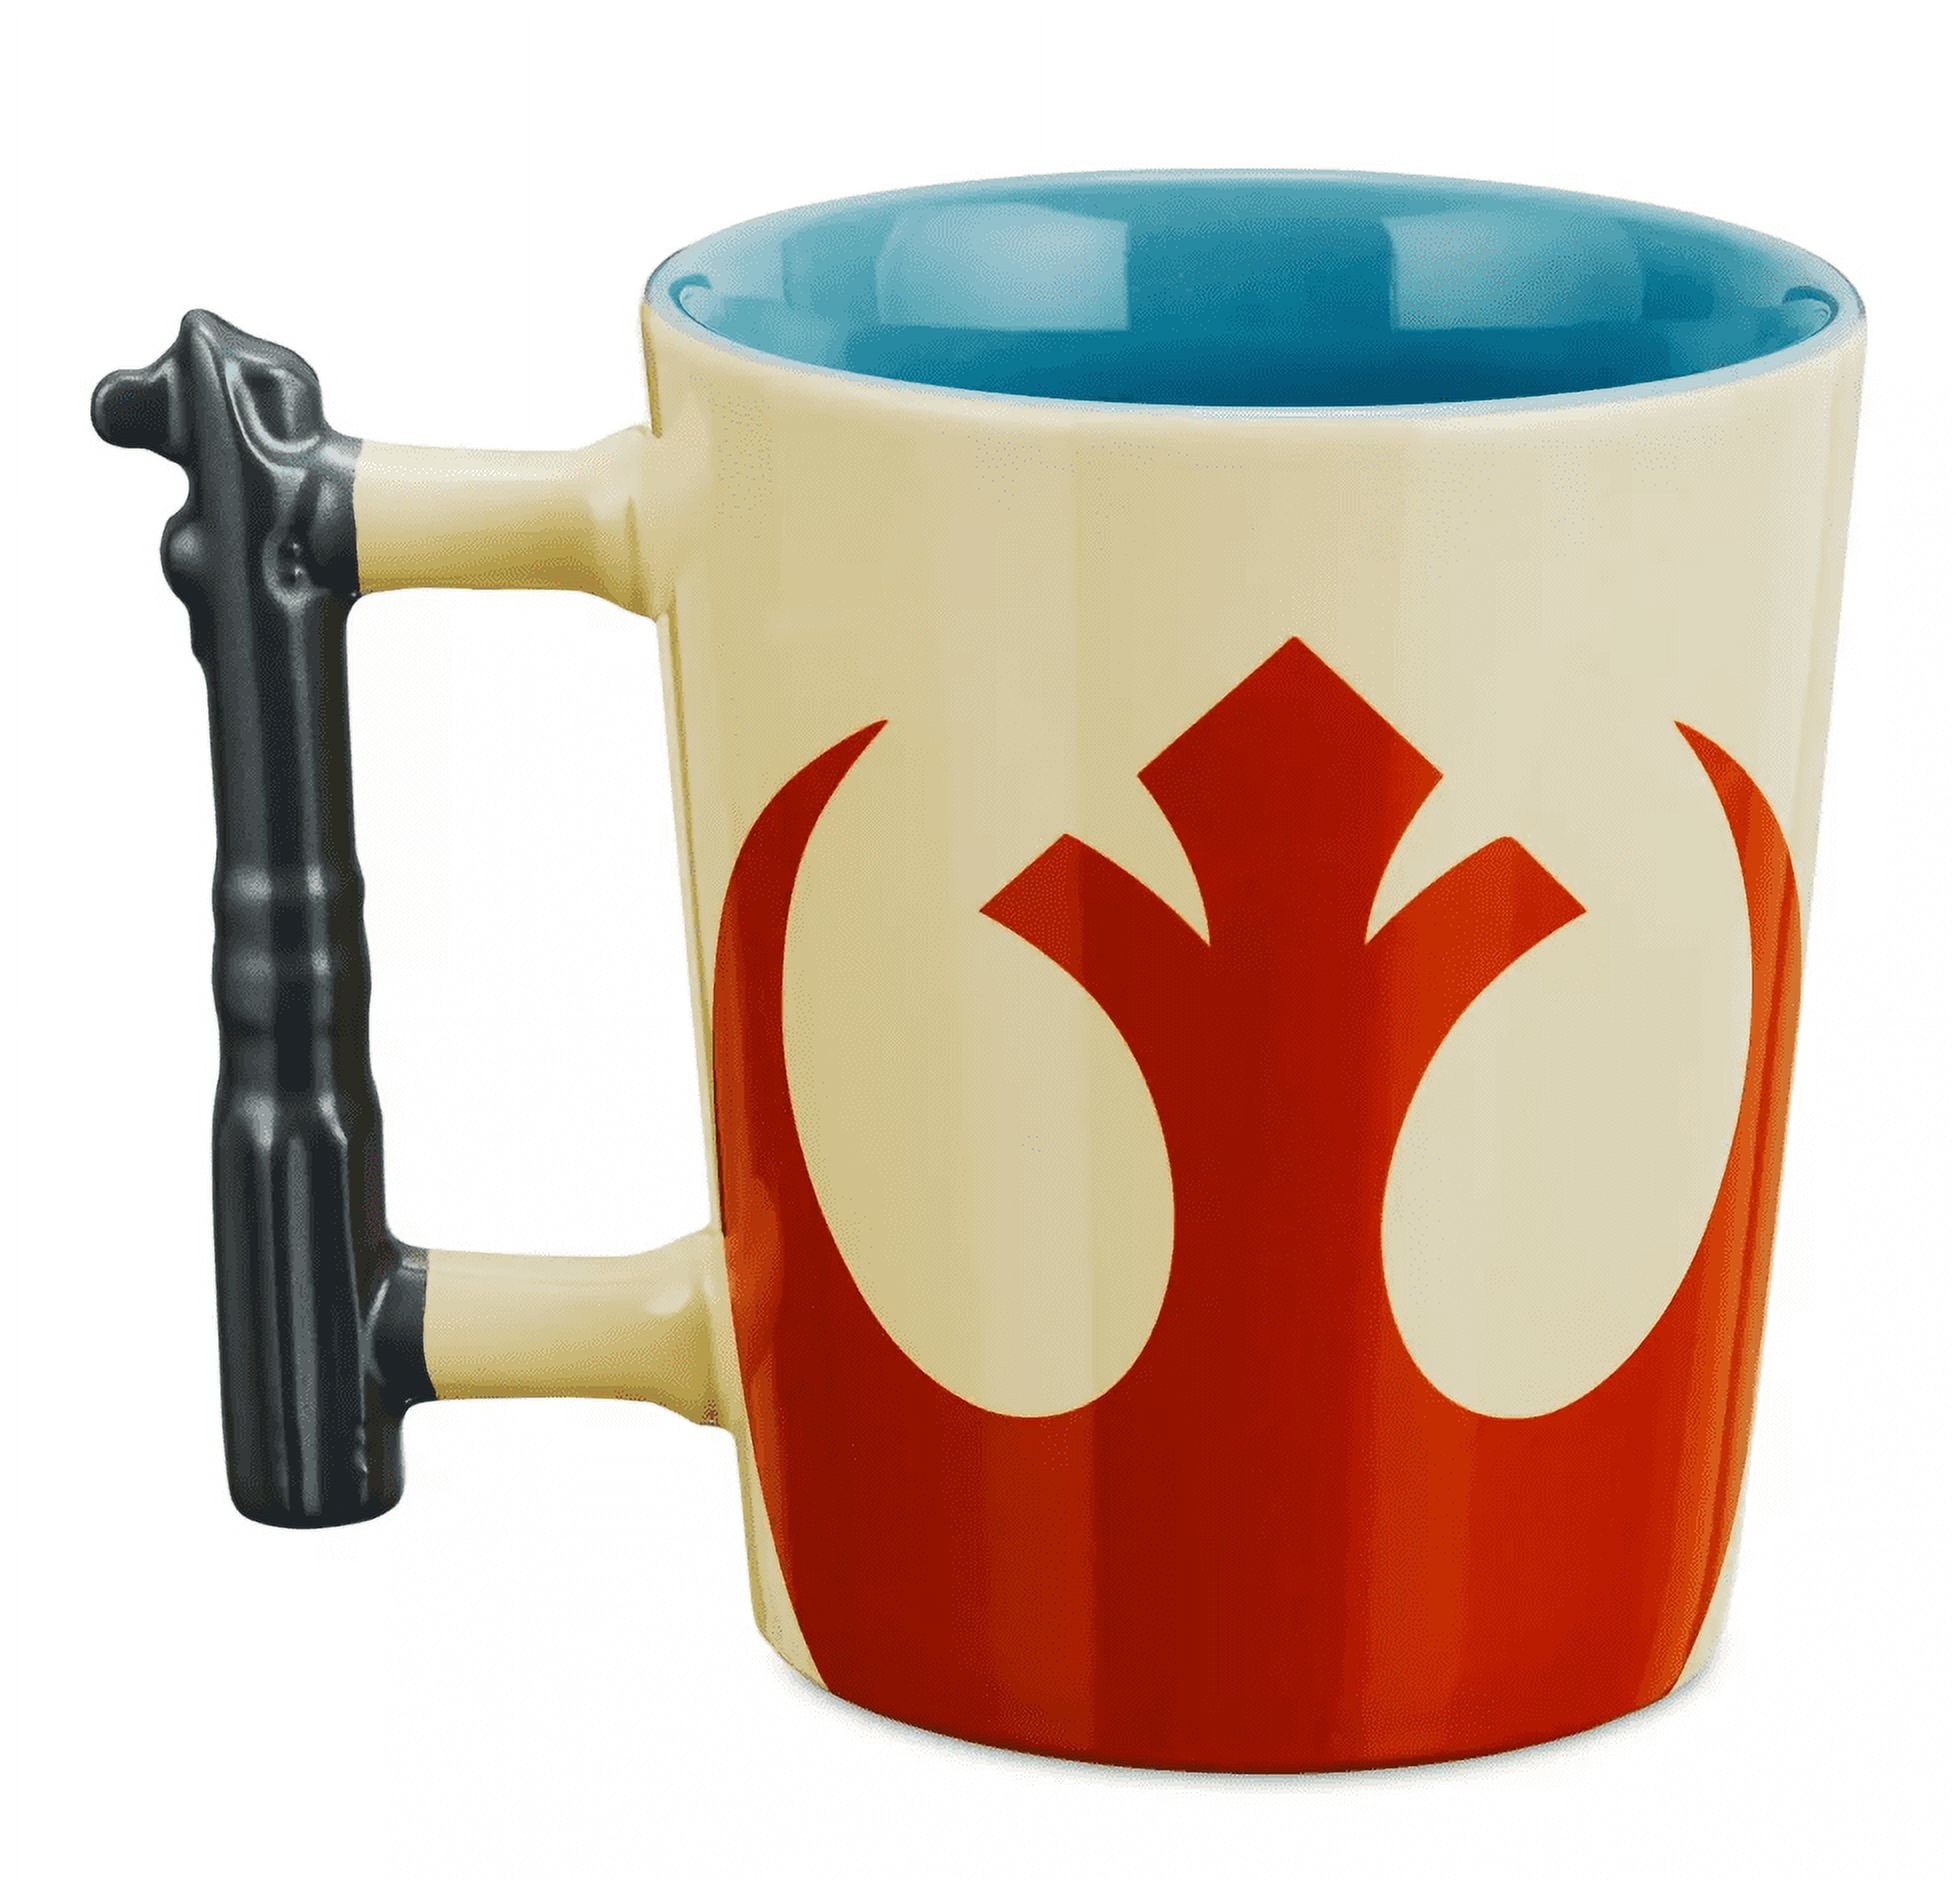 Star Wars May The Force Be With You Heat Change Ceramic Mug – IGN